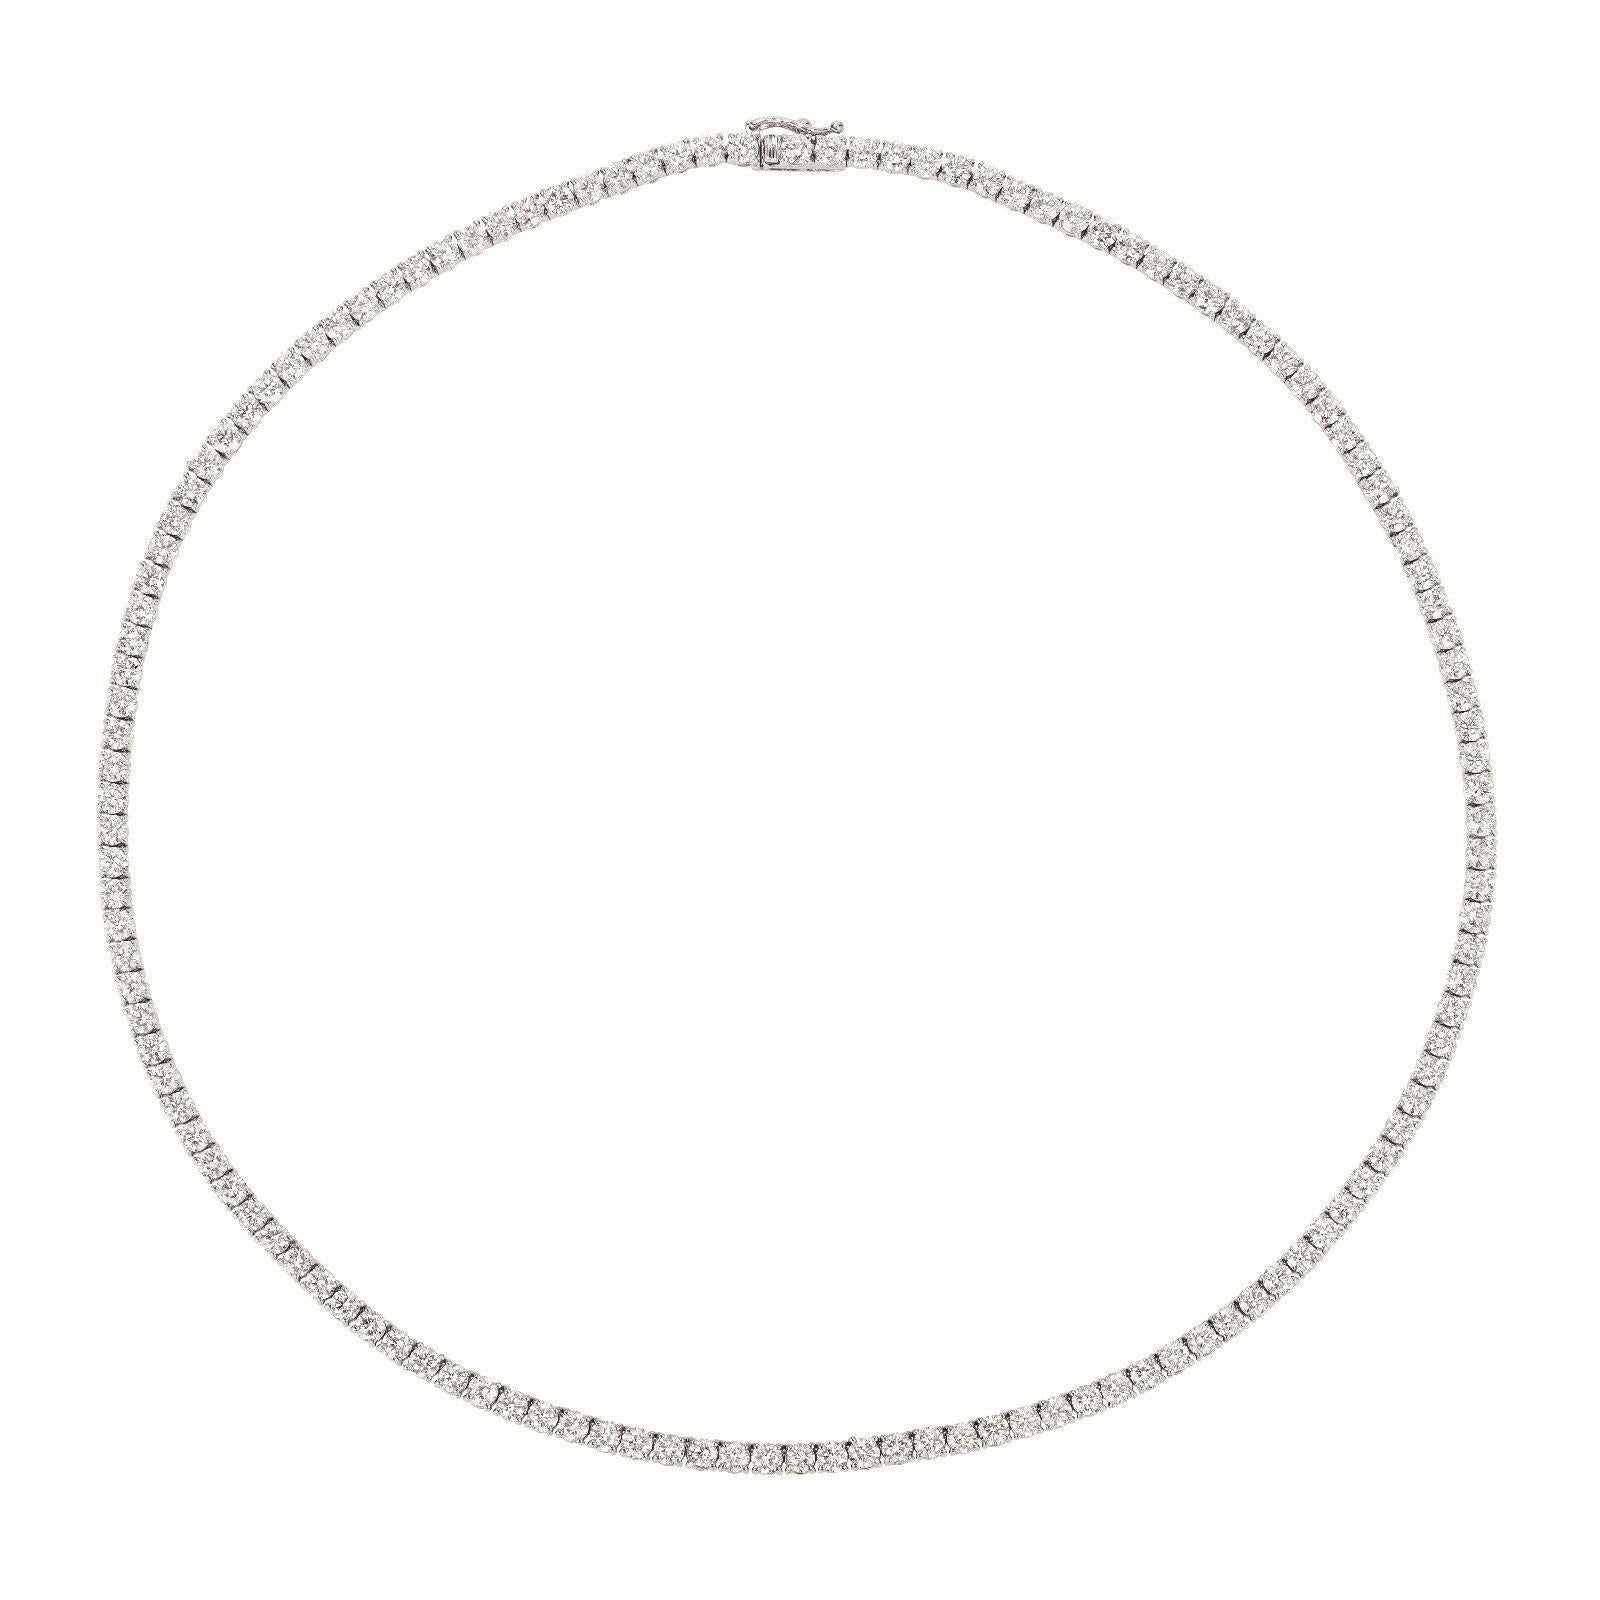 12.00 Carat Diamond Tennis Necklace G SI 14K White Gold 16 inches

100% Natural Diamonds, Not Enhanced in any way Round Cut Diamond  Necklace  
12.00CT
G-H 
SI  
14K White Gold, Pave style, 15.1 gram
16 inches in length, 1/8 inch in width
135